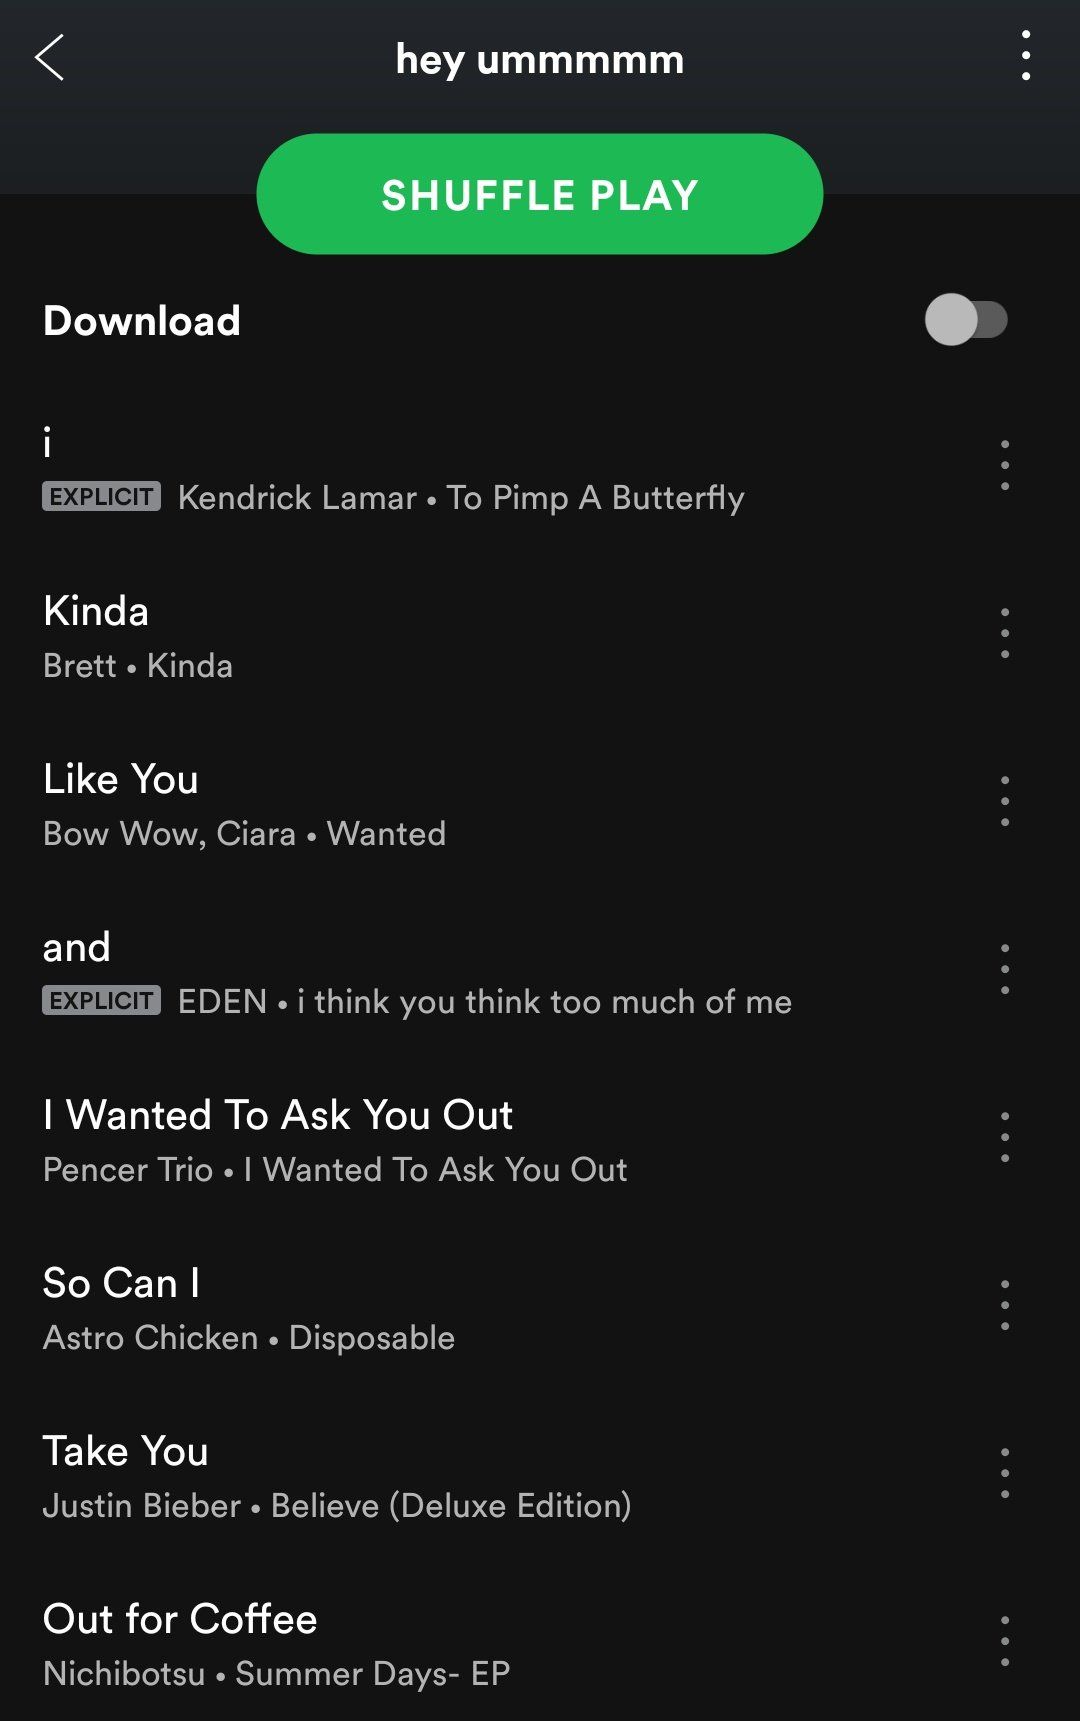 My crush asked me about my playlist so I sent her.